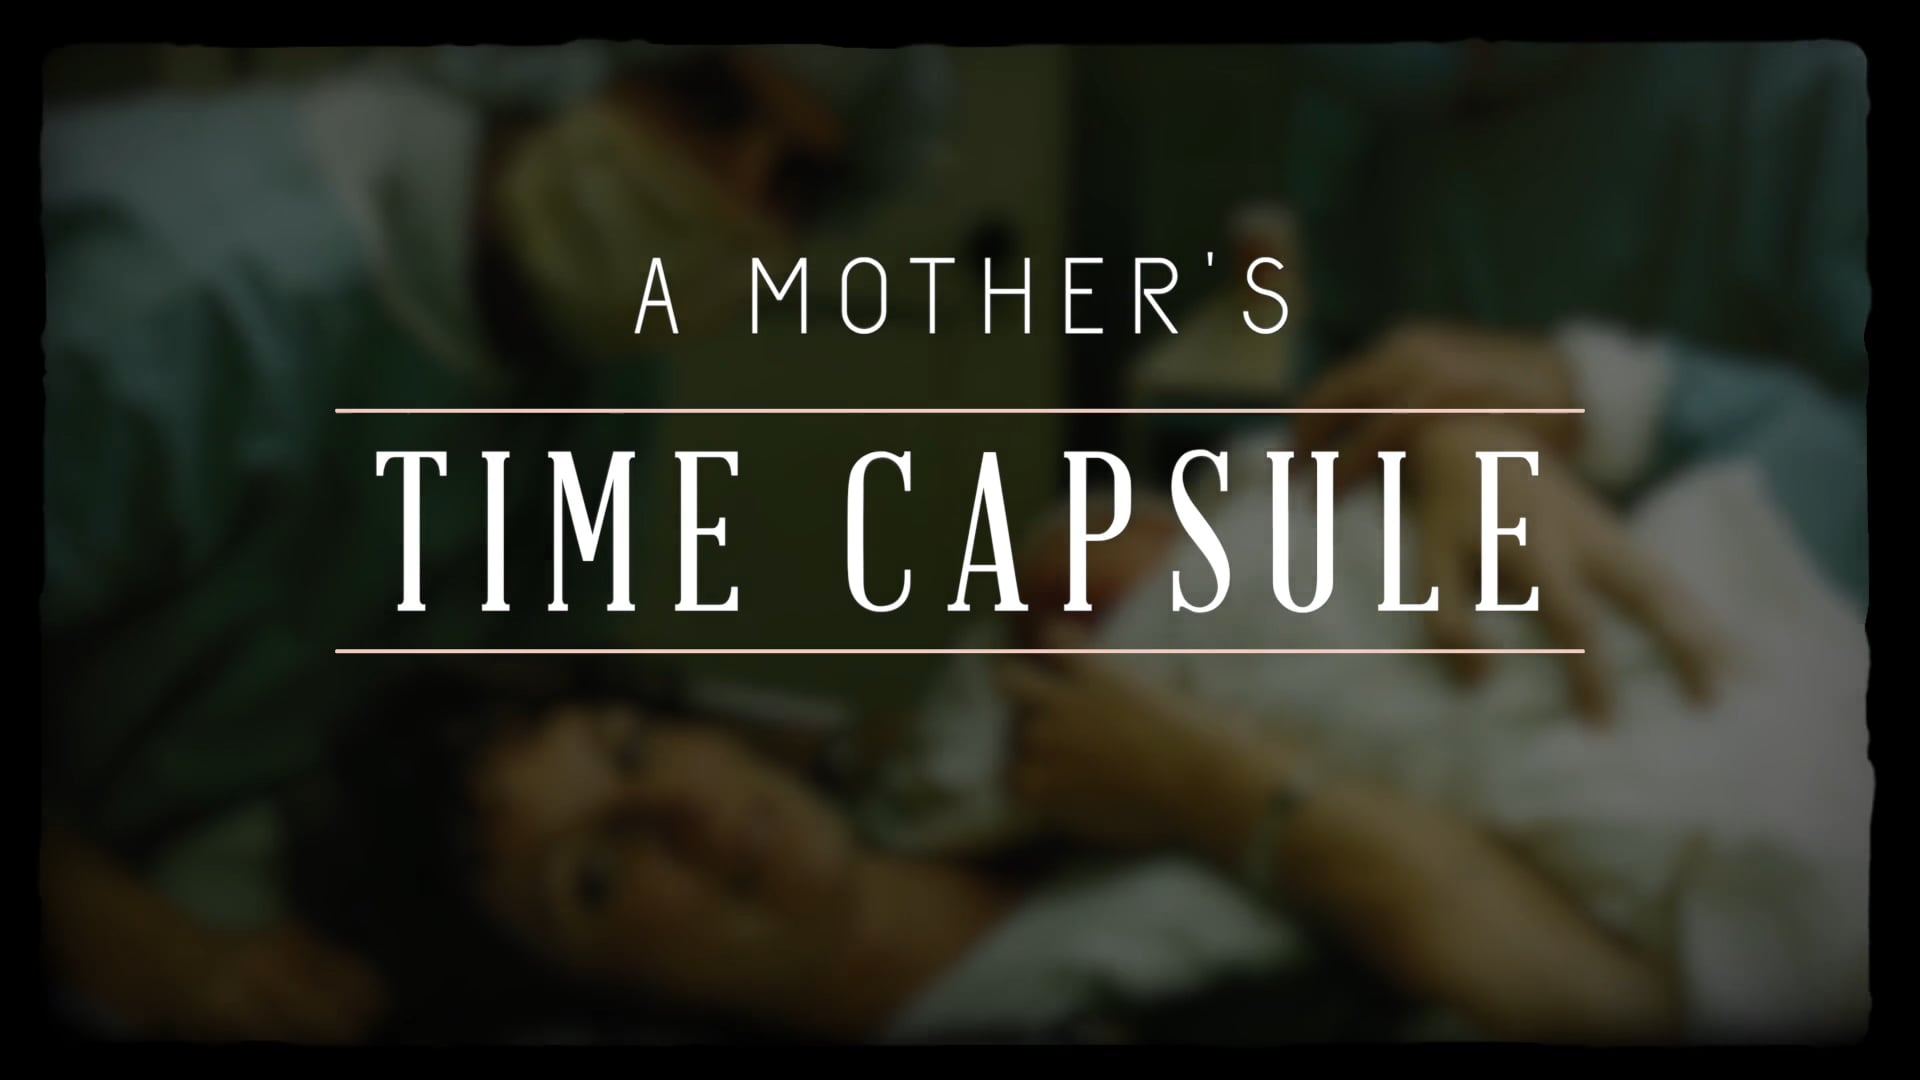 A Mother's Time Capsule